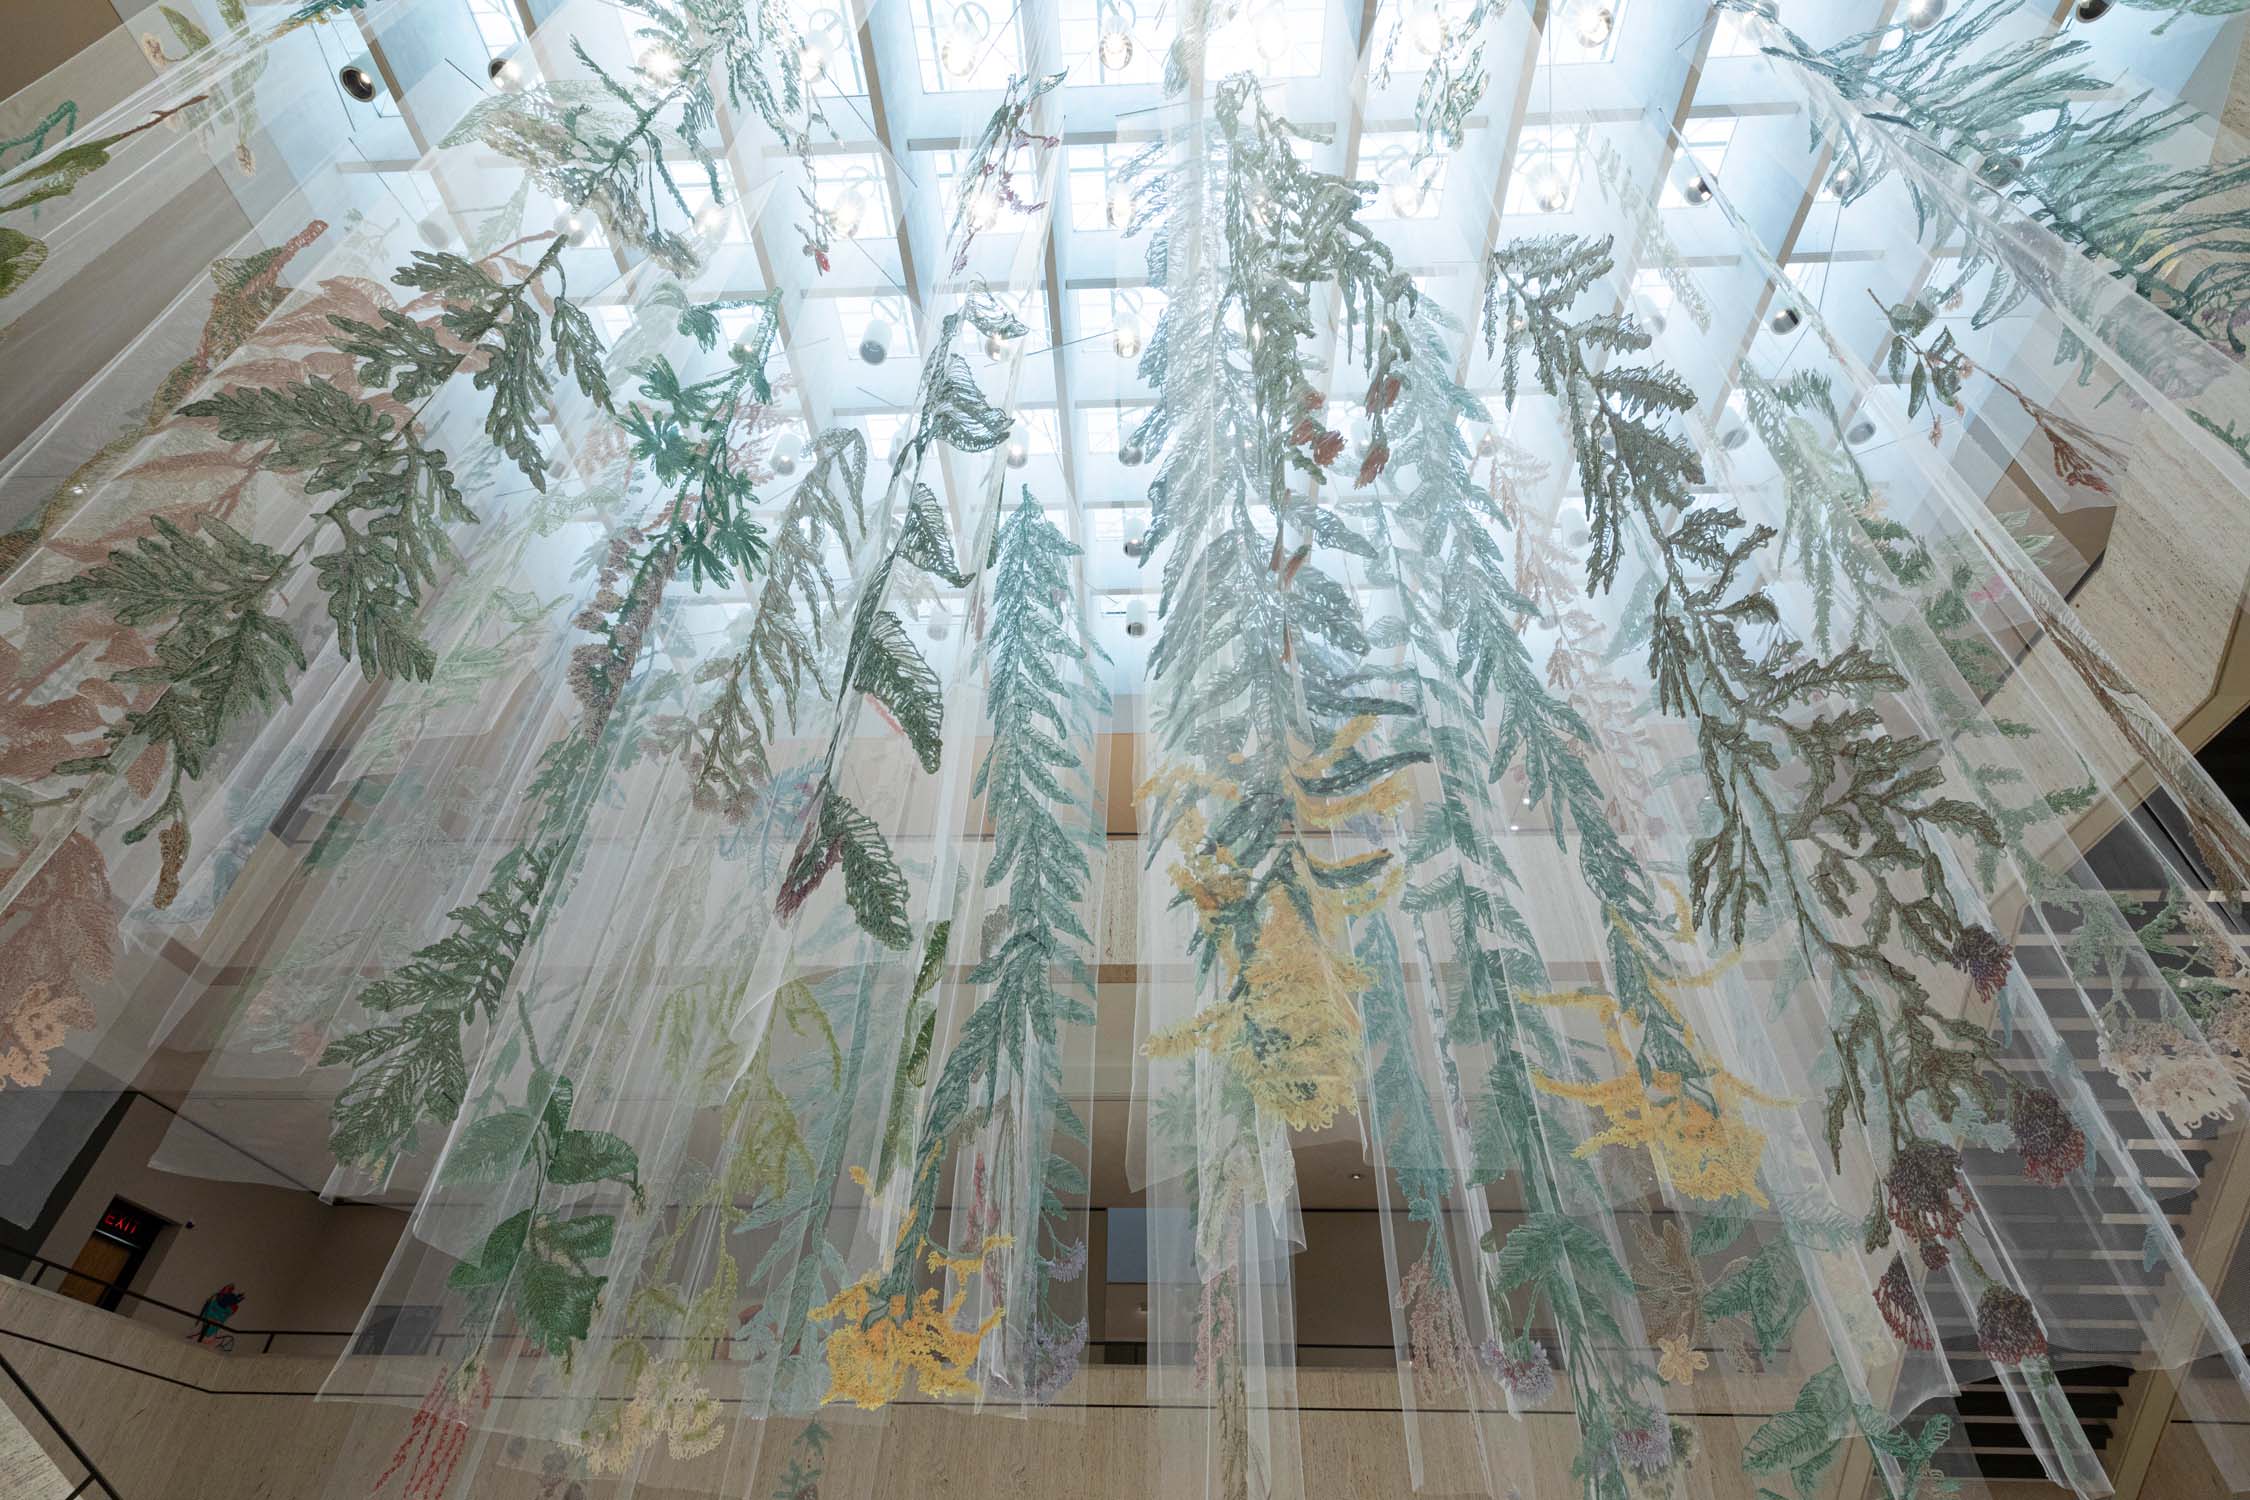 Strips of translucent fabric embroidered with plants hanging from a brightly lit ceiling